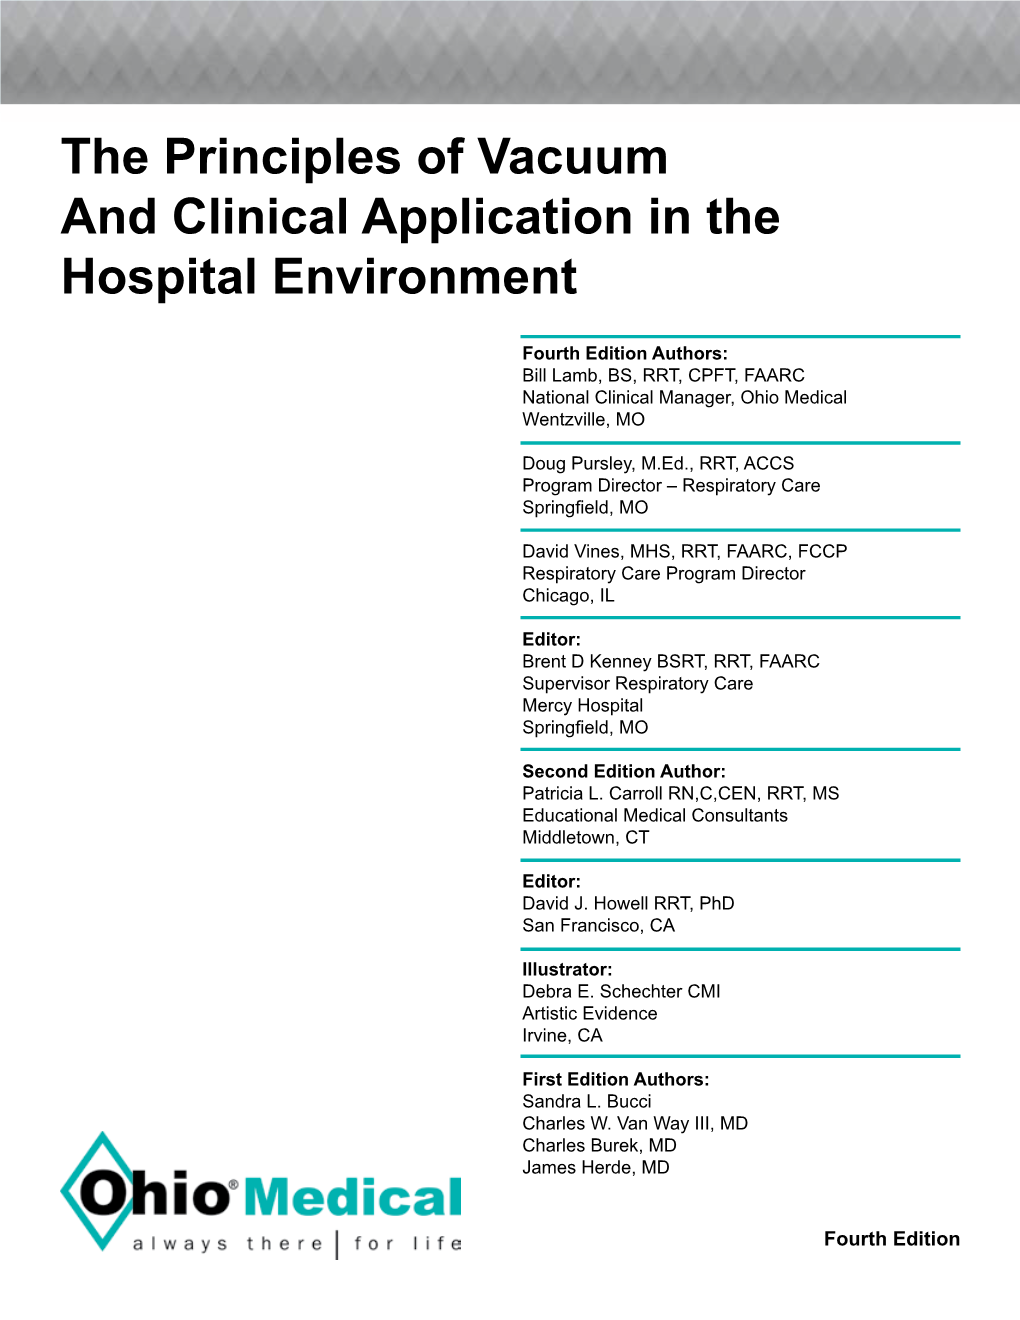 The Principles of Vacuum and Clinical Application in the Hospital Environment